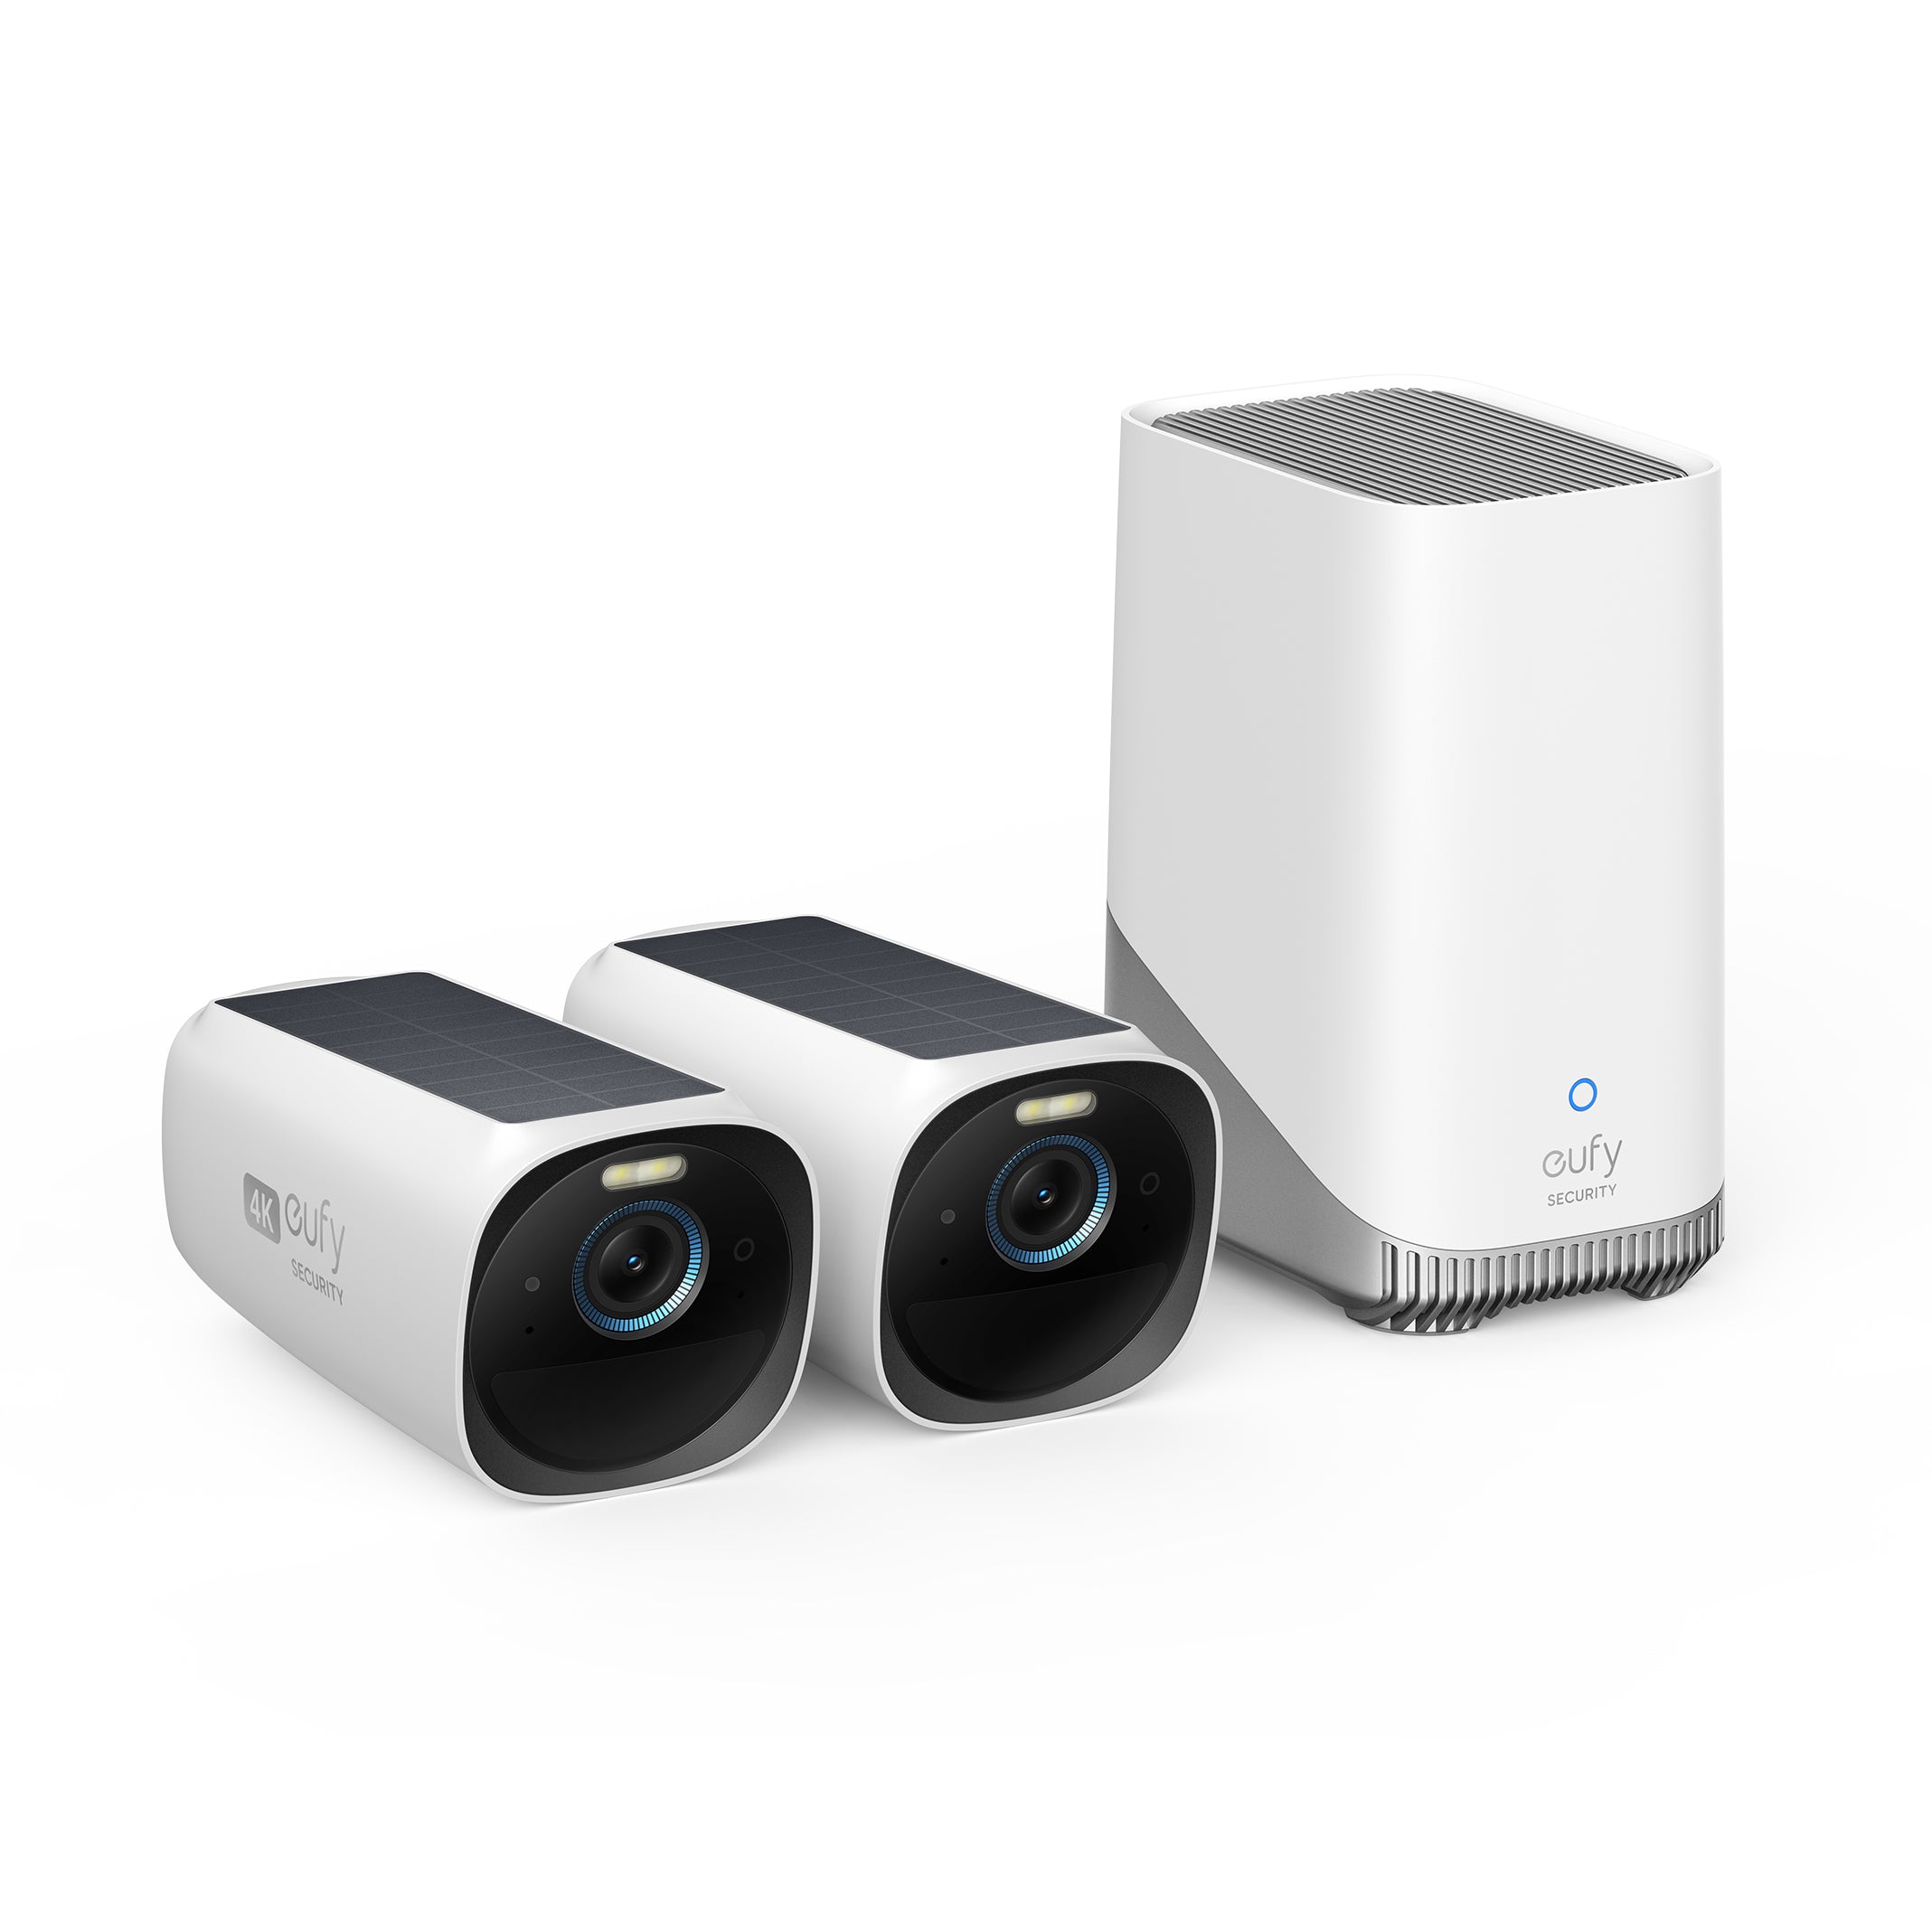 Anker eufy Security S330 eufyCam 3 Smart Wireless Home Security Camera Systems